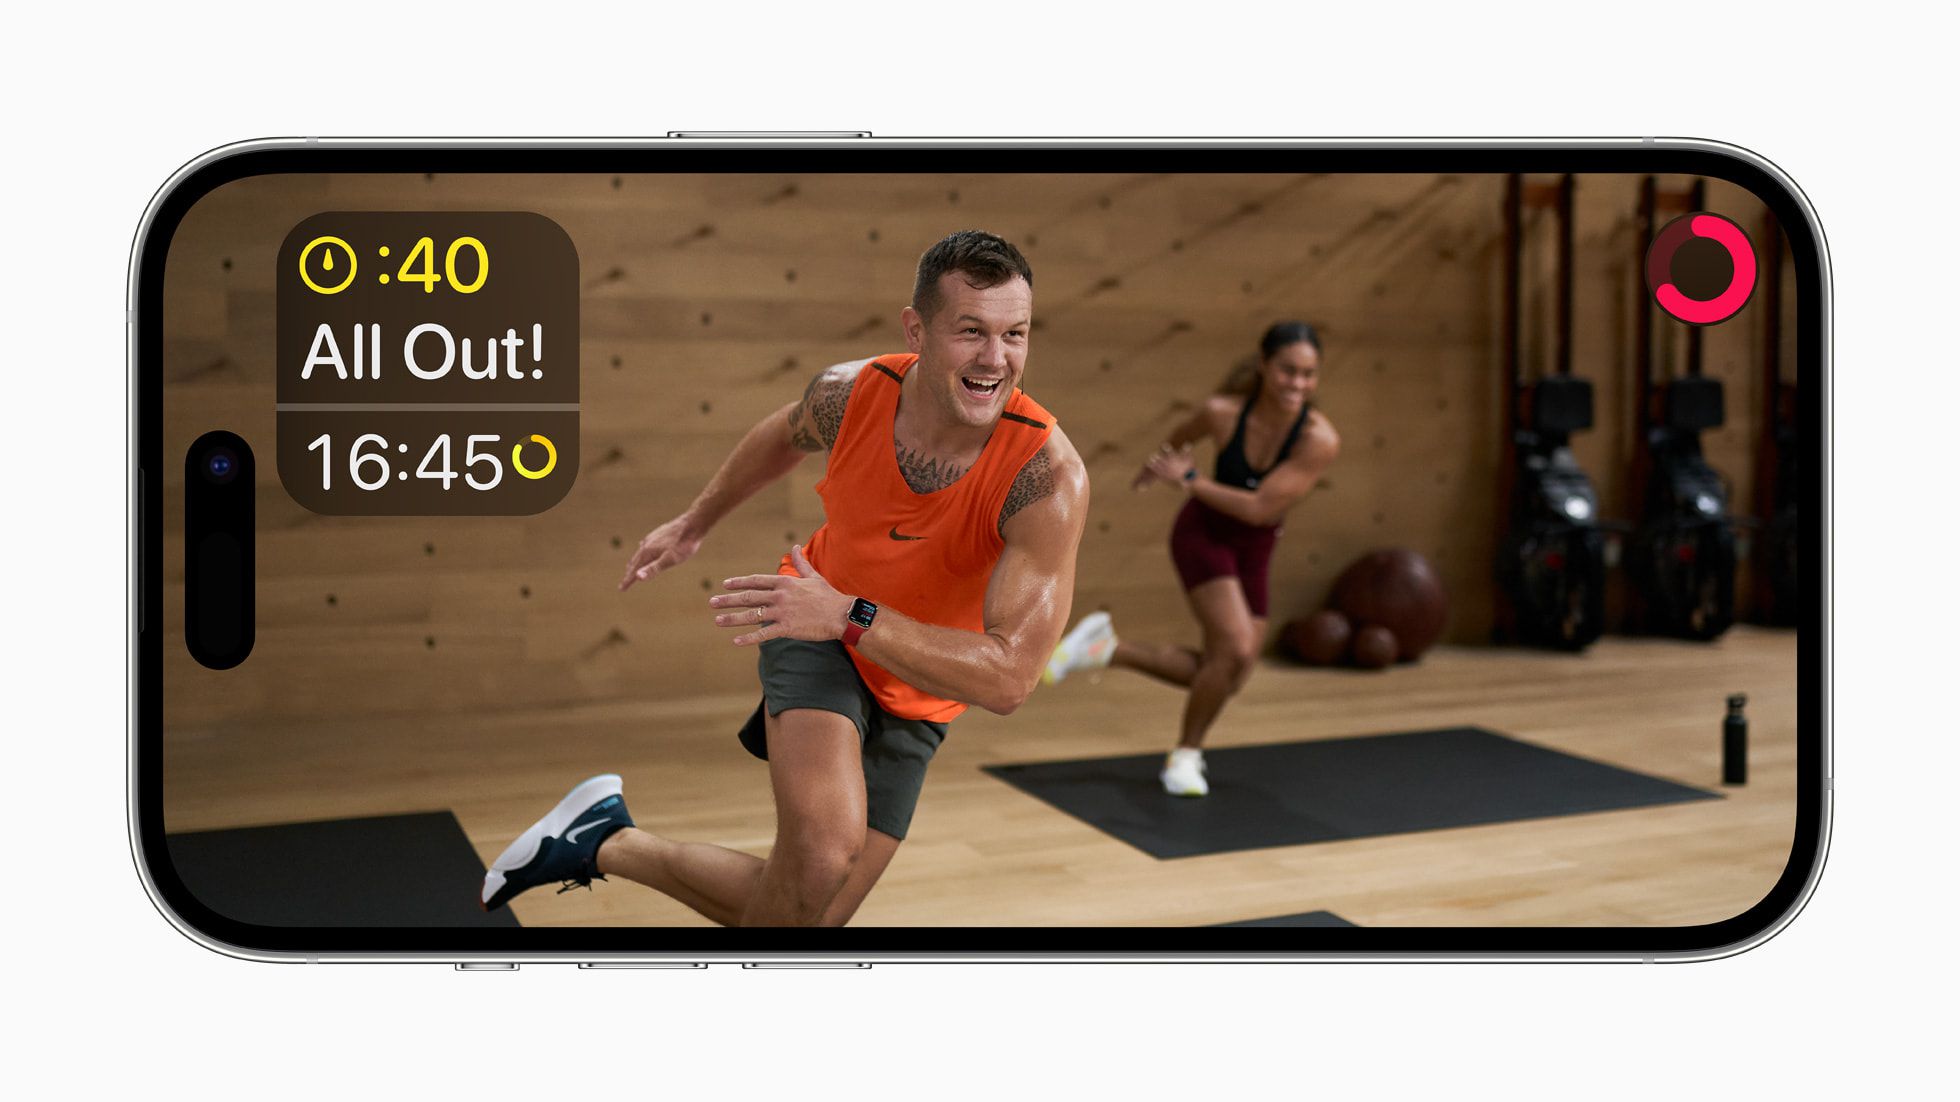 iPhone owners will be able to take Fitness+ classes without using an Apple Watch.